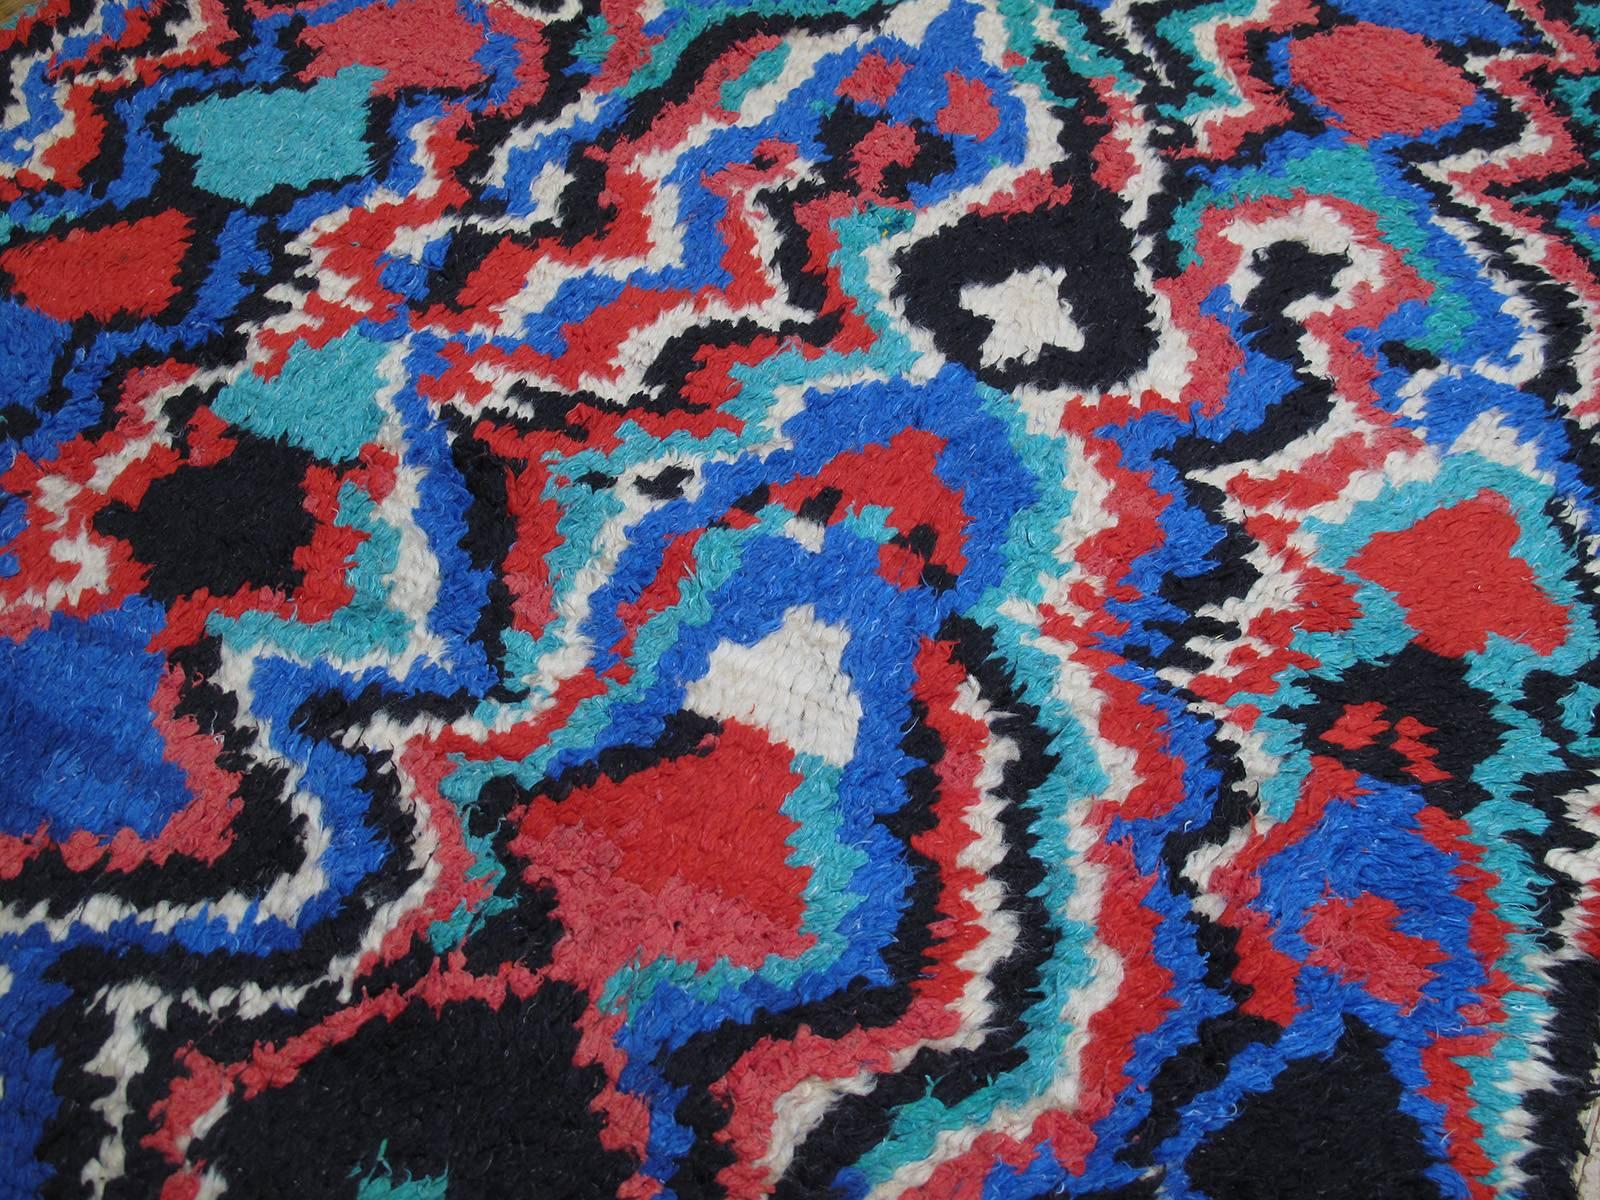 Hand-Knotted Psychedelic Azilal Berber Moroccan Rug For Sale